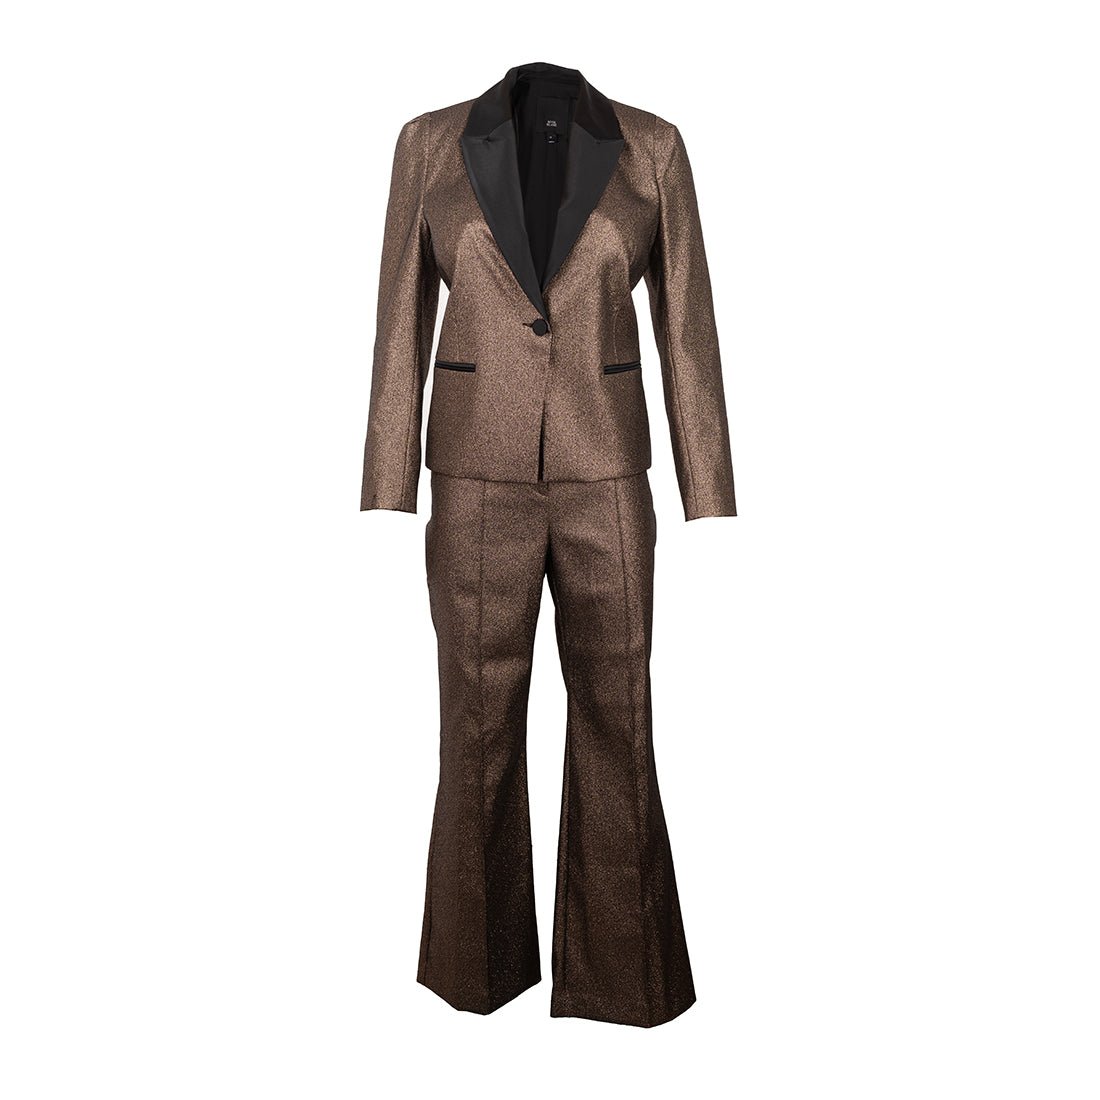 River Island Brand New Suit Blazer and Pants - mymadstore.com